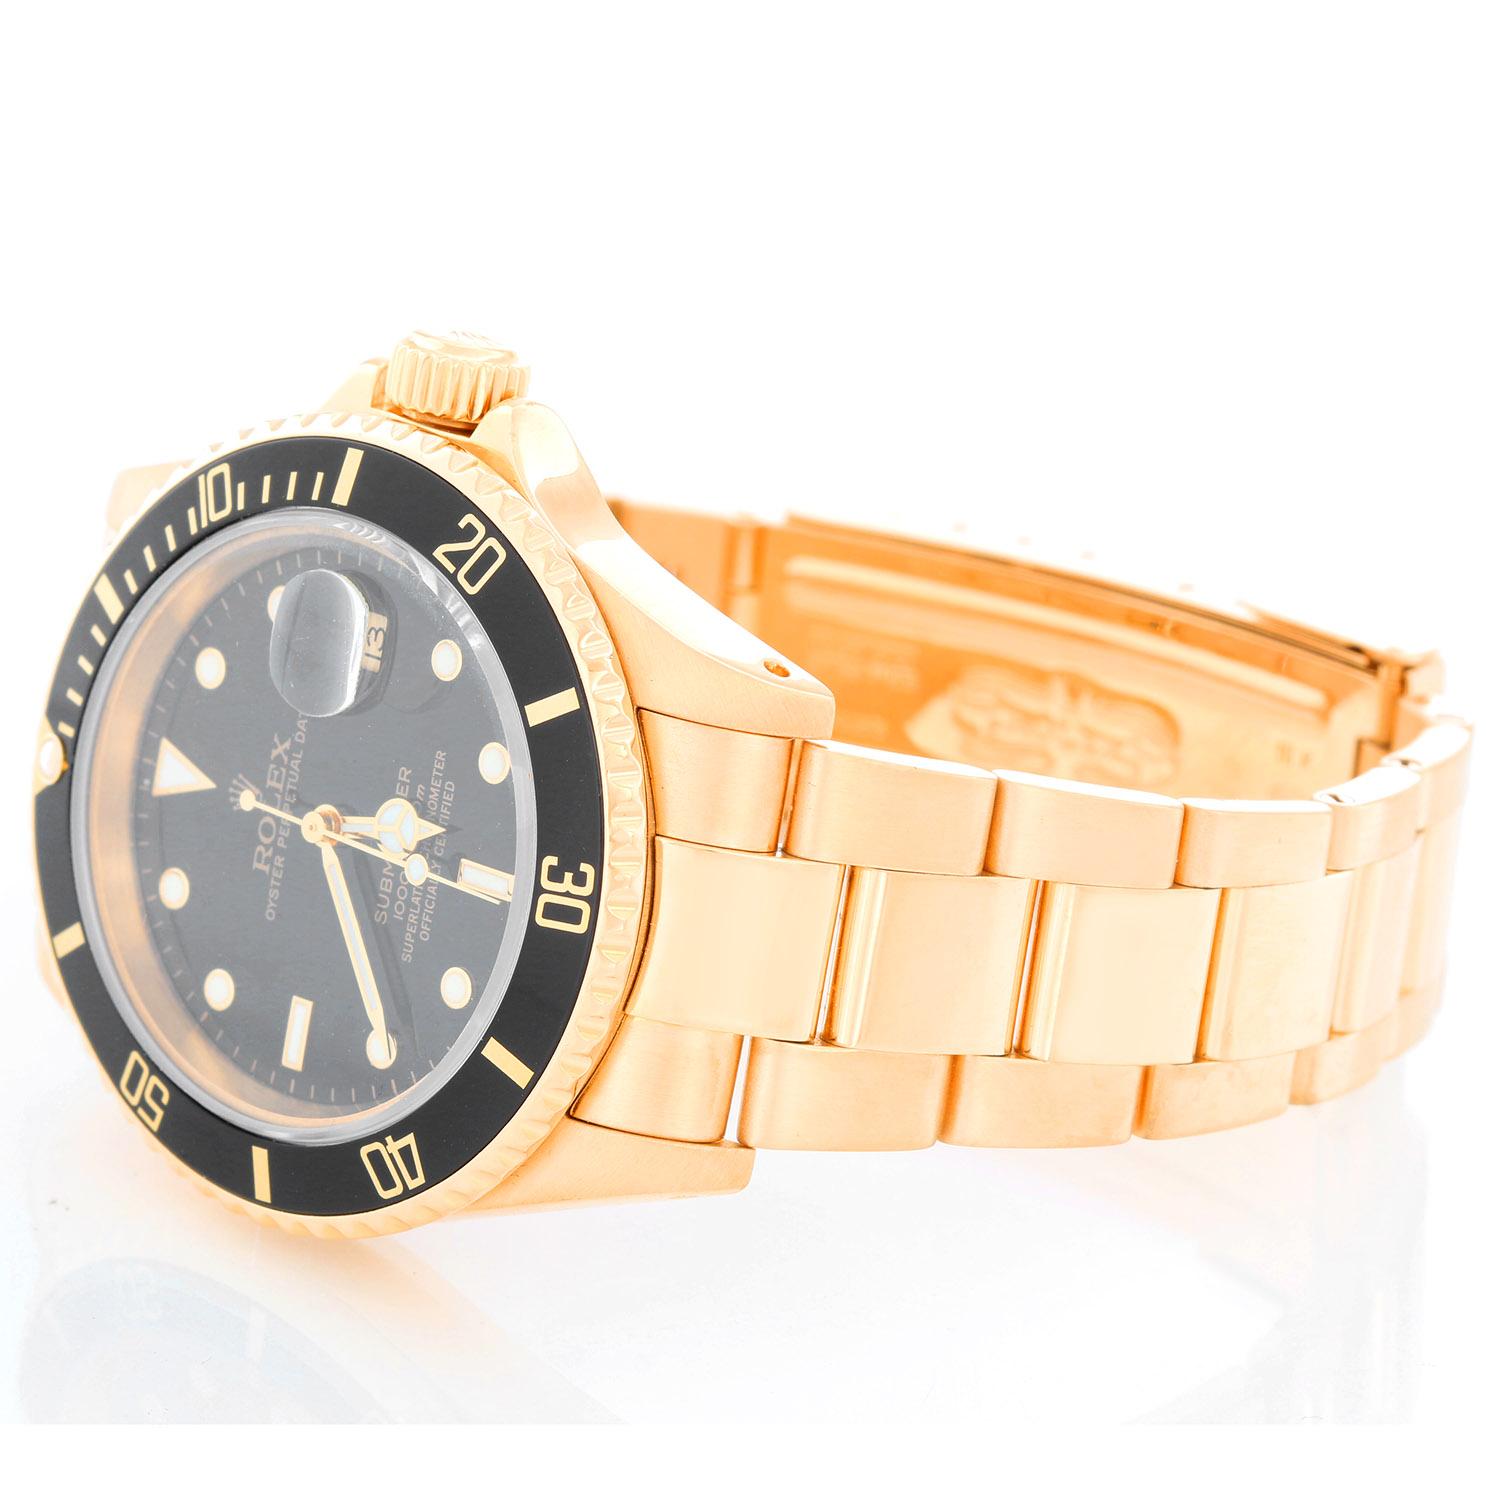 Rolex Submariner 18k Gold Men's Watch 16618  - Automatic winding, 31 jewels, Quickset, sapphire crystal. 18k yellow gold case with rotating bezel with black insert (40mm diameter). Black dial with white hour markers. 18k yellow gold Oyster bracelet